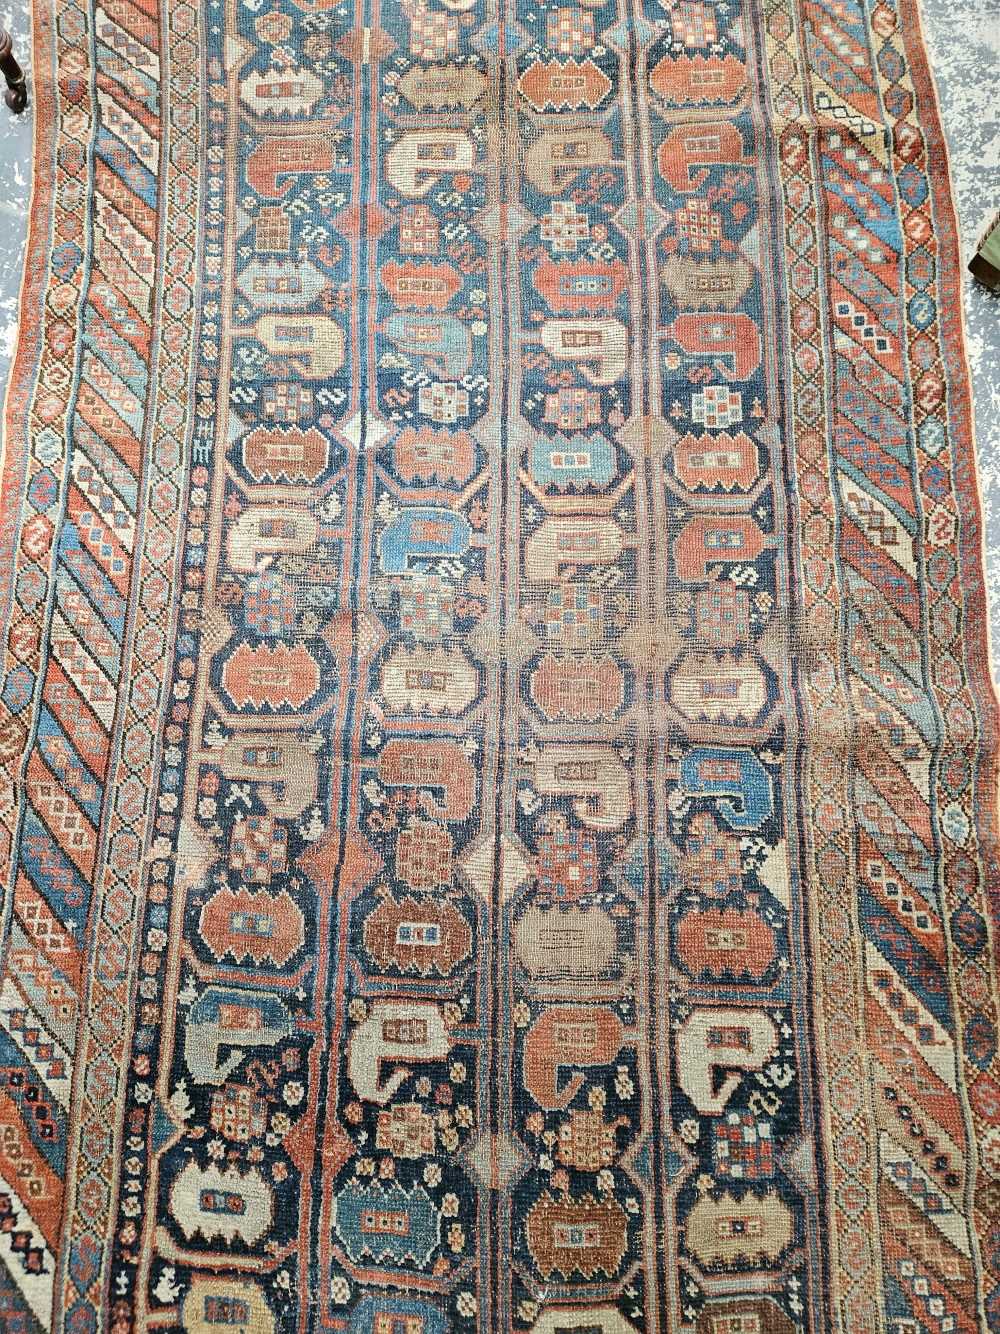 AN ANTIQUE PERSIAN TRIBAL RUG 213 x 110 cm. - Image 4 of 5